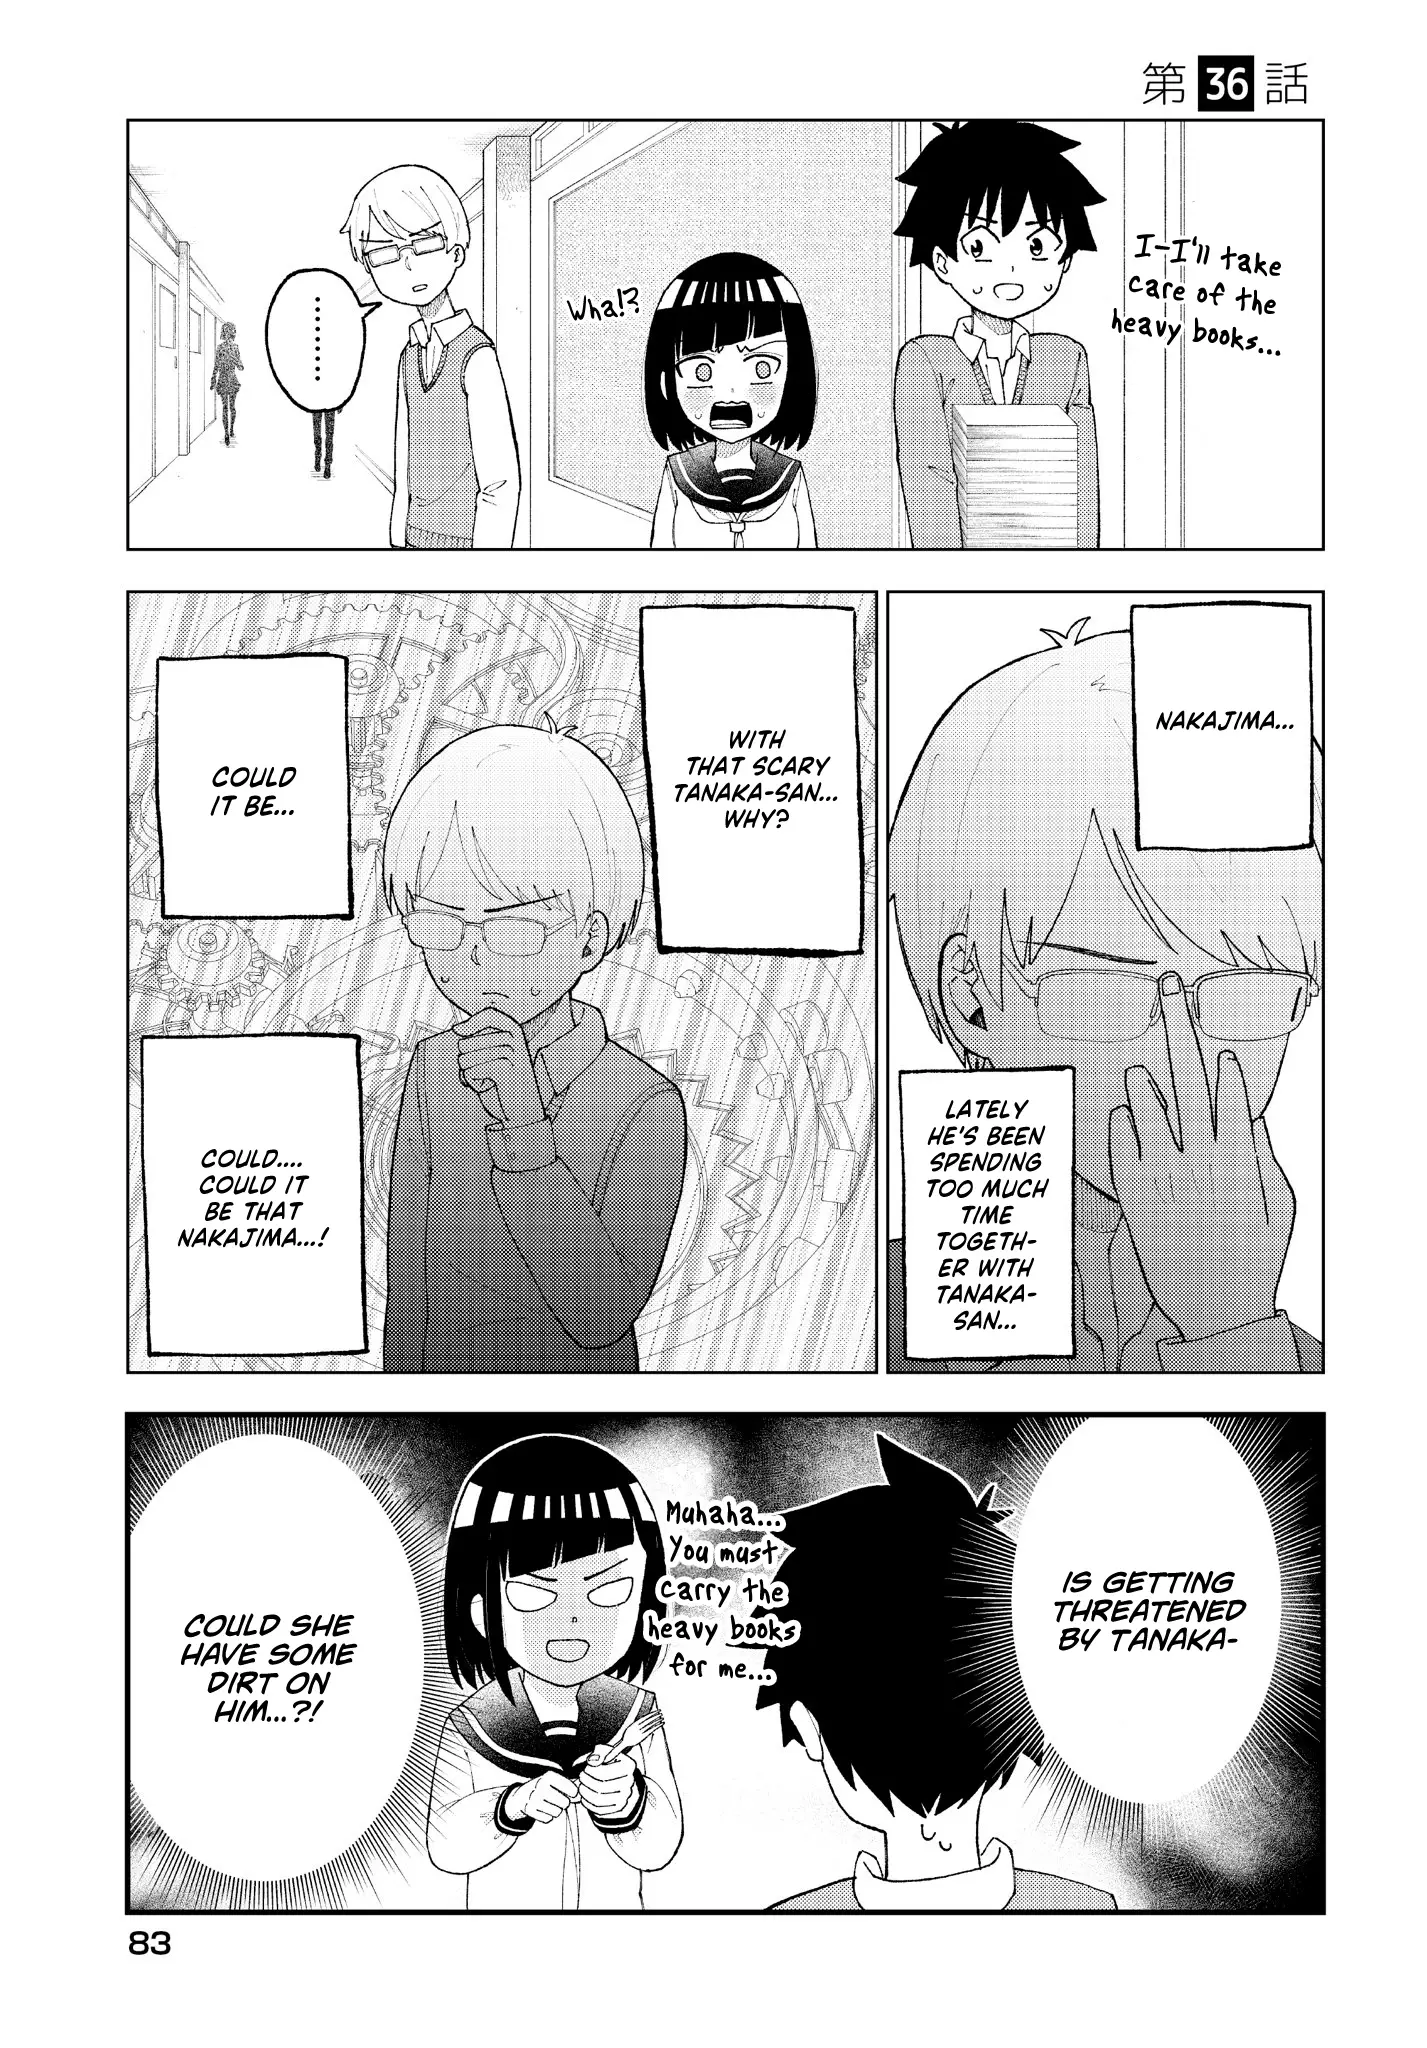 My Classmate Tanaka-San Is Super Scary - 36 page 2